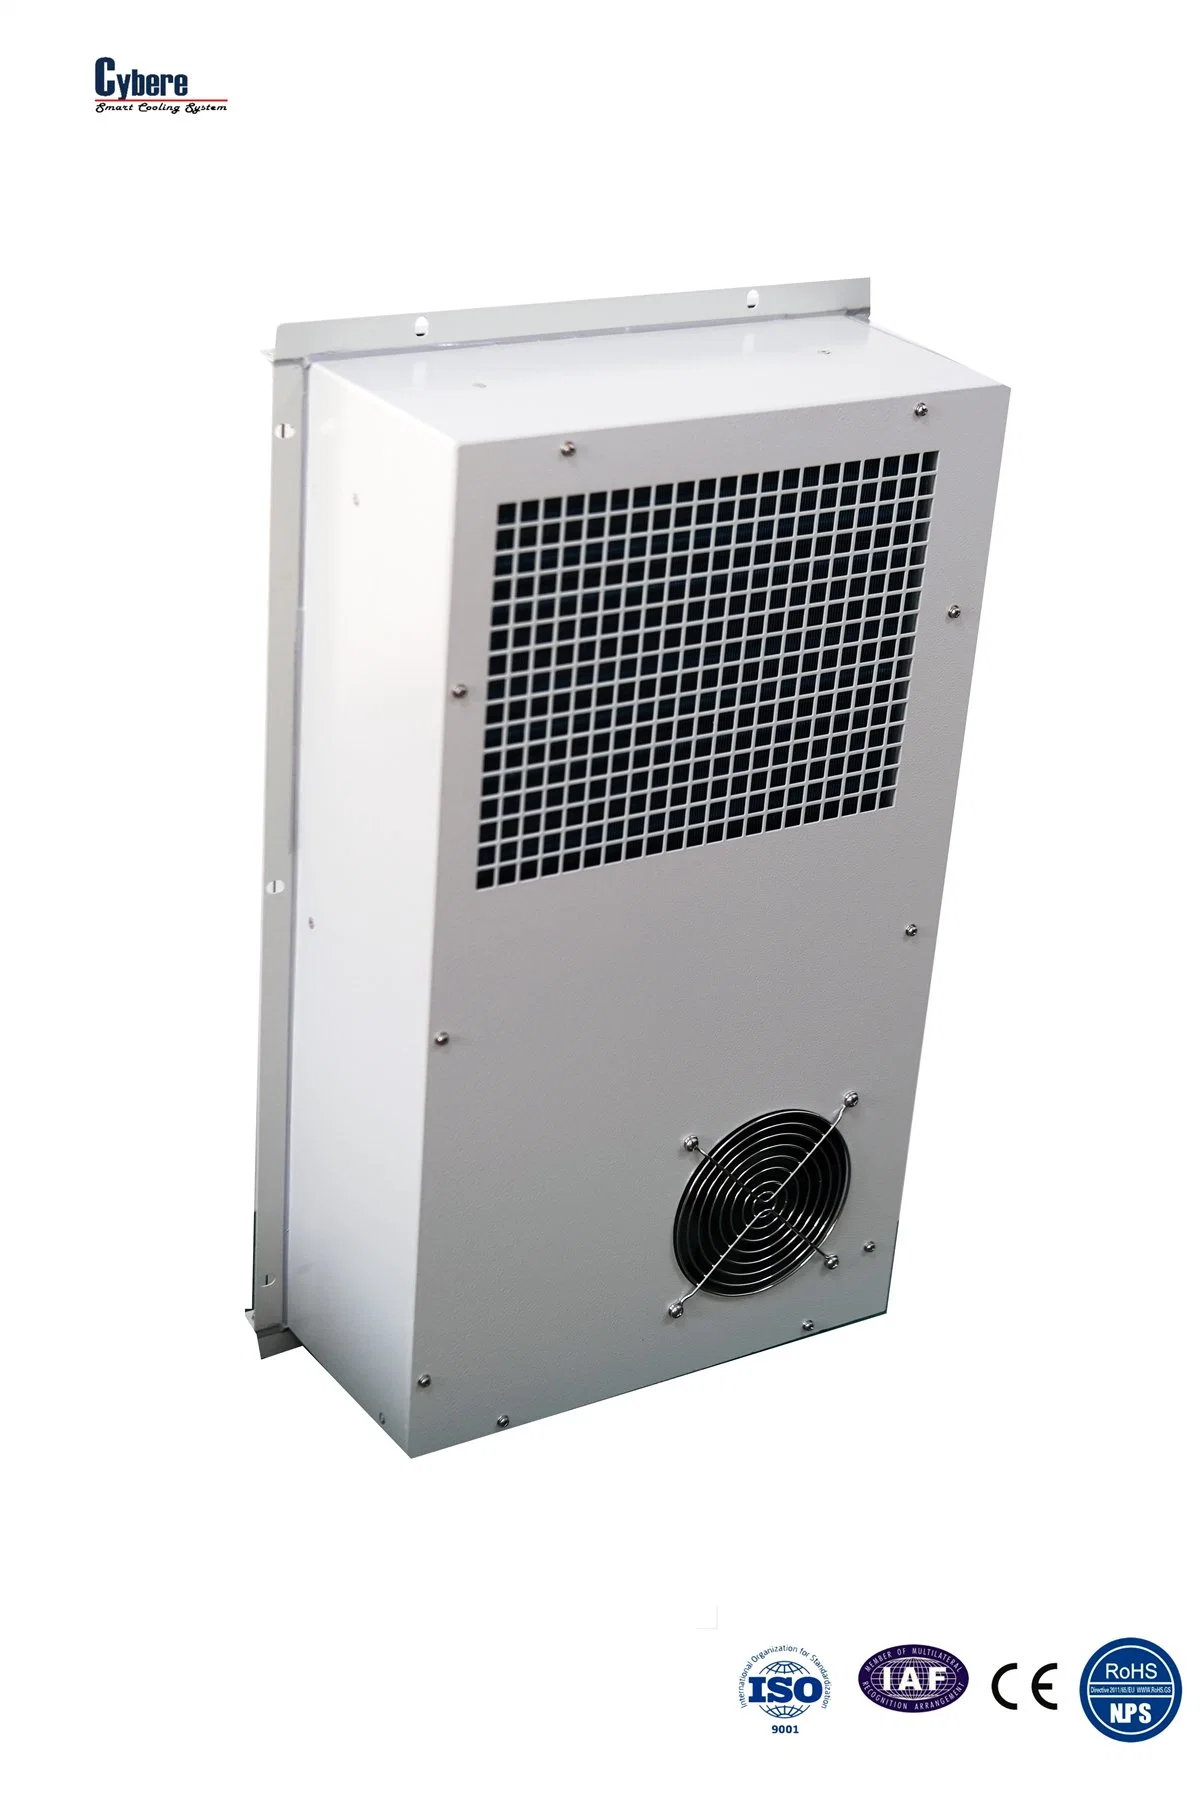 Industry 800W DC48V Cabinet Telecom Air Conditioner Wall Mounted